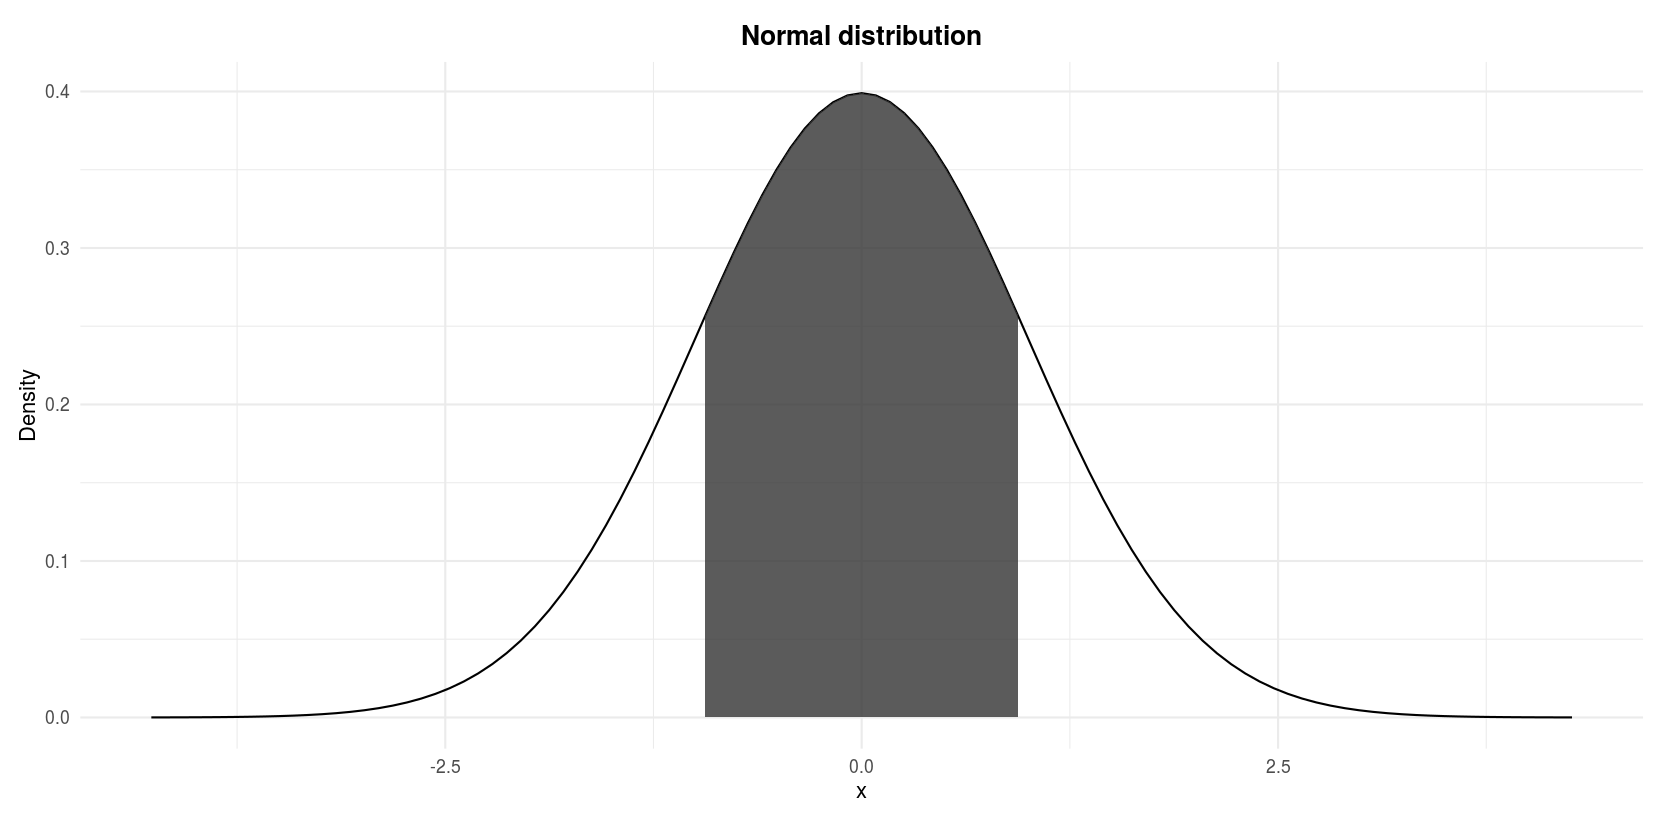 normality assumption - If my histogram shows a bell-shaped curve, can I say  my data is normally distributed? - Cross Validated